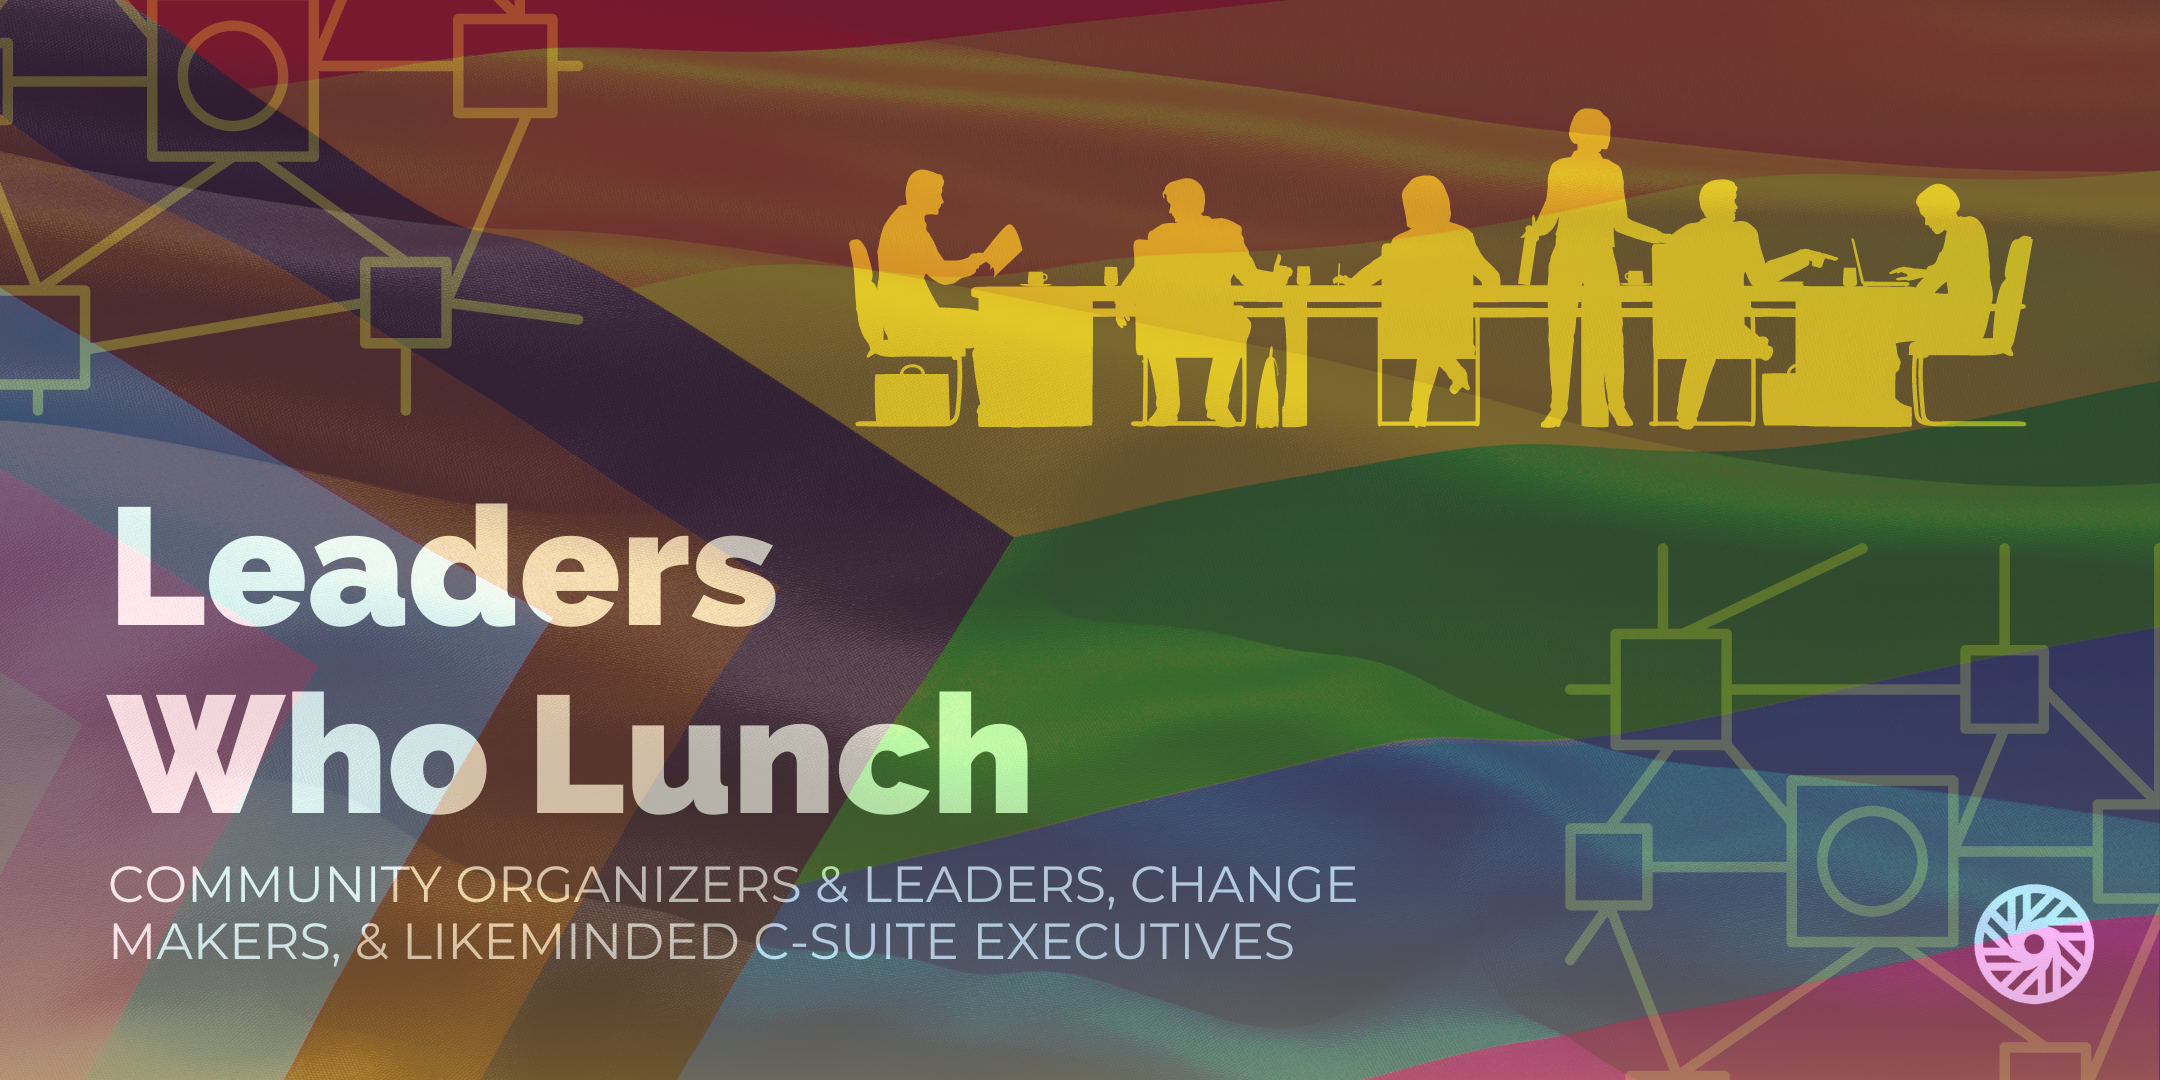 Leaders Who Lunch event at low tide kitchen and bar on june 18 at 11:30am